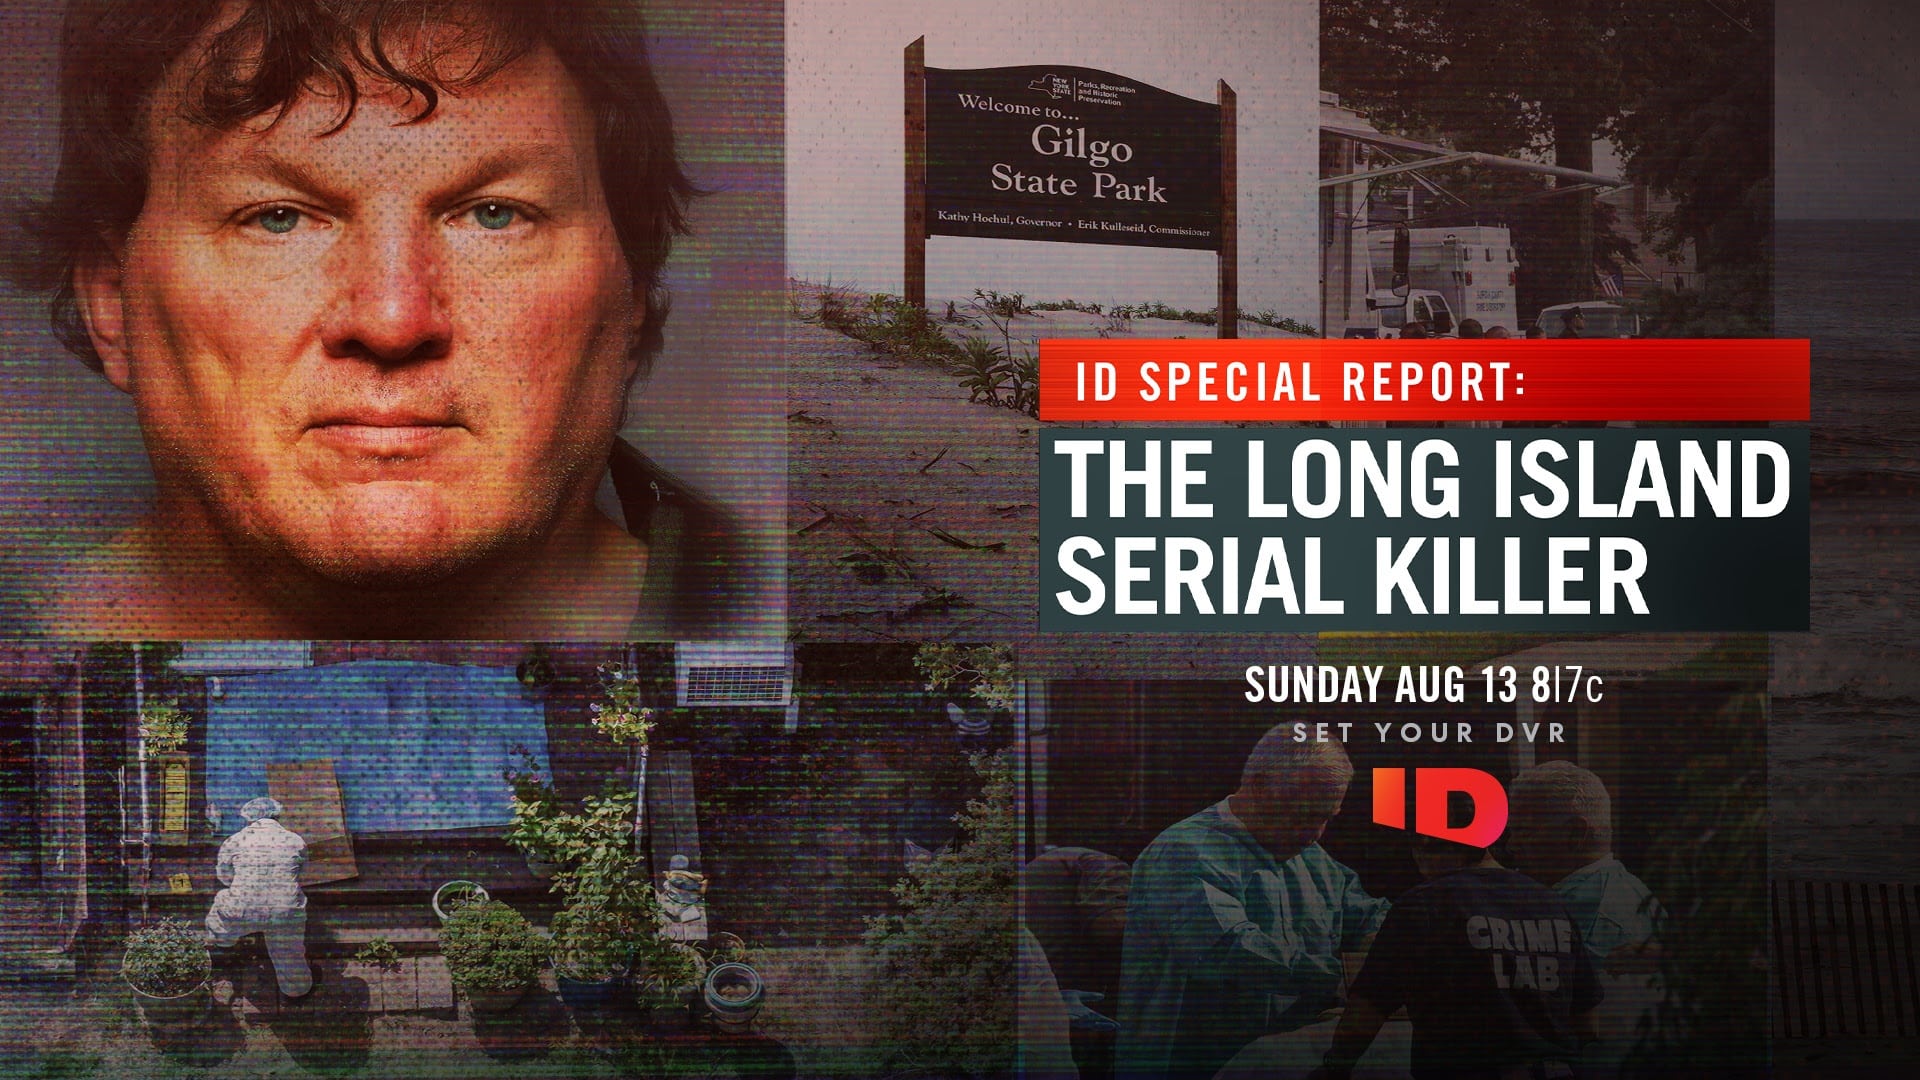 ID Announces New Special About The Long Island Serial Killer